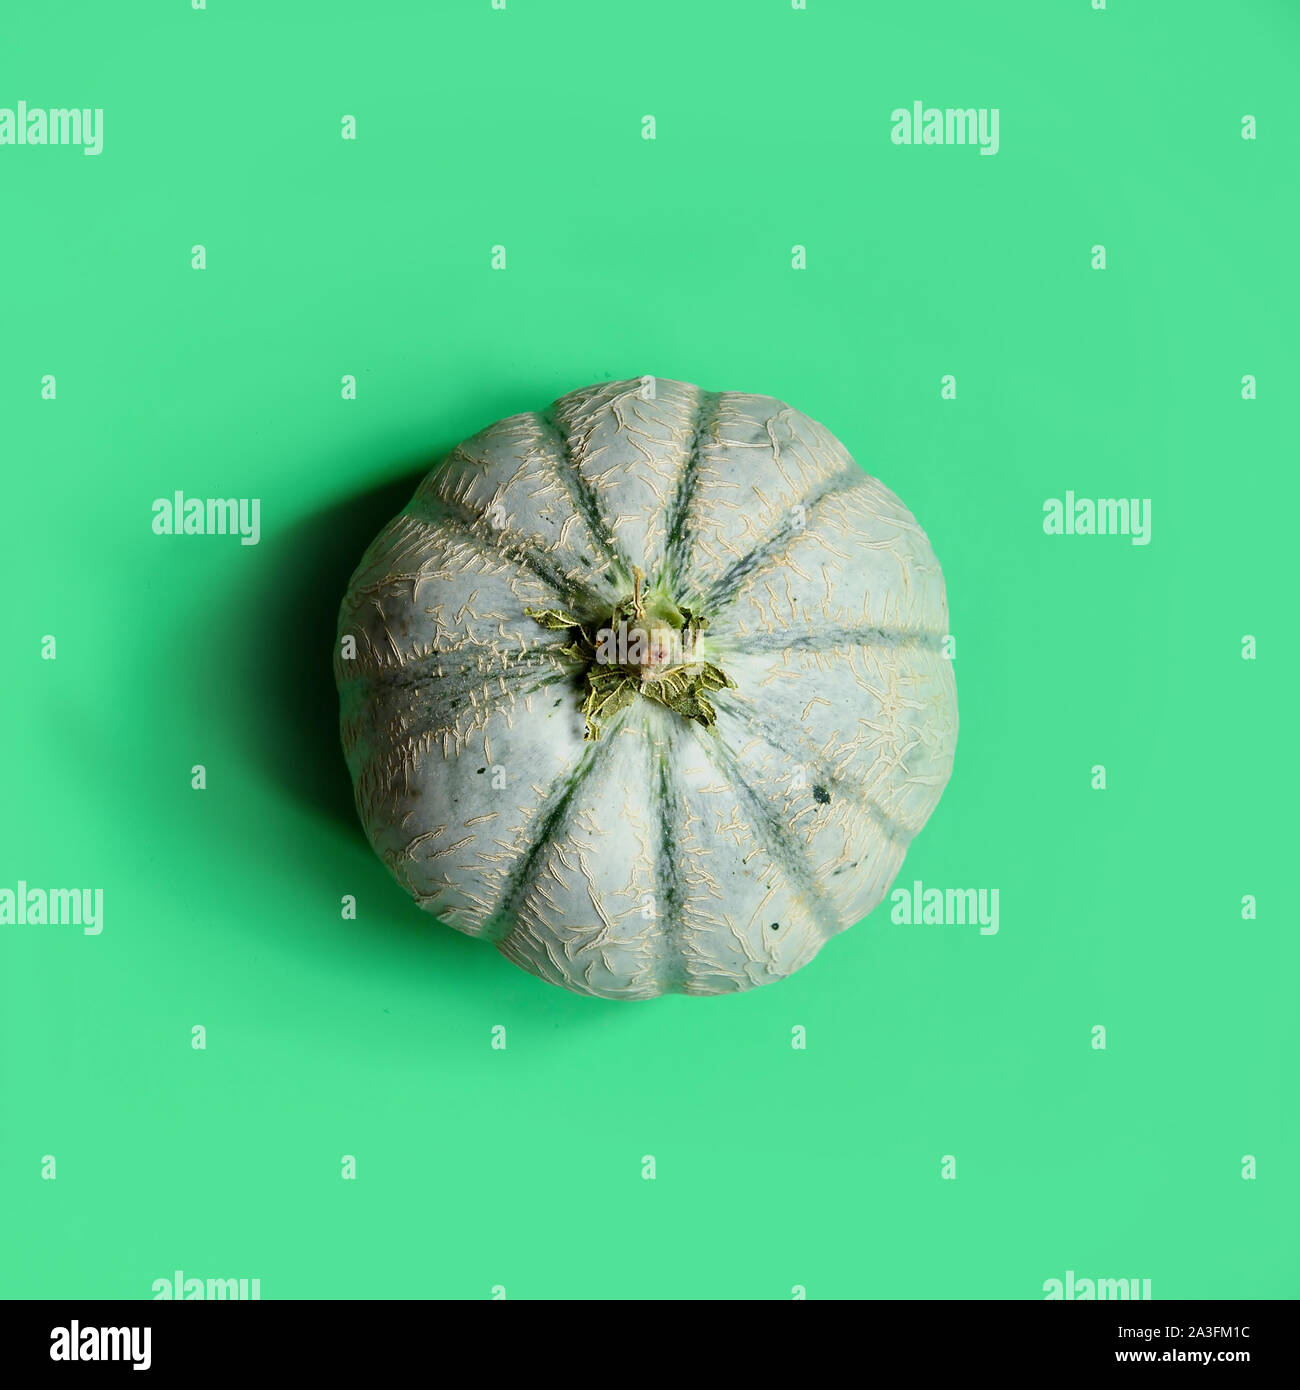 Cantaloupe isolated on green background.Flat lay.Minimal food concept Stock Photo